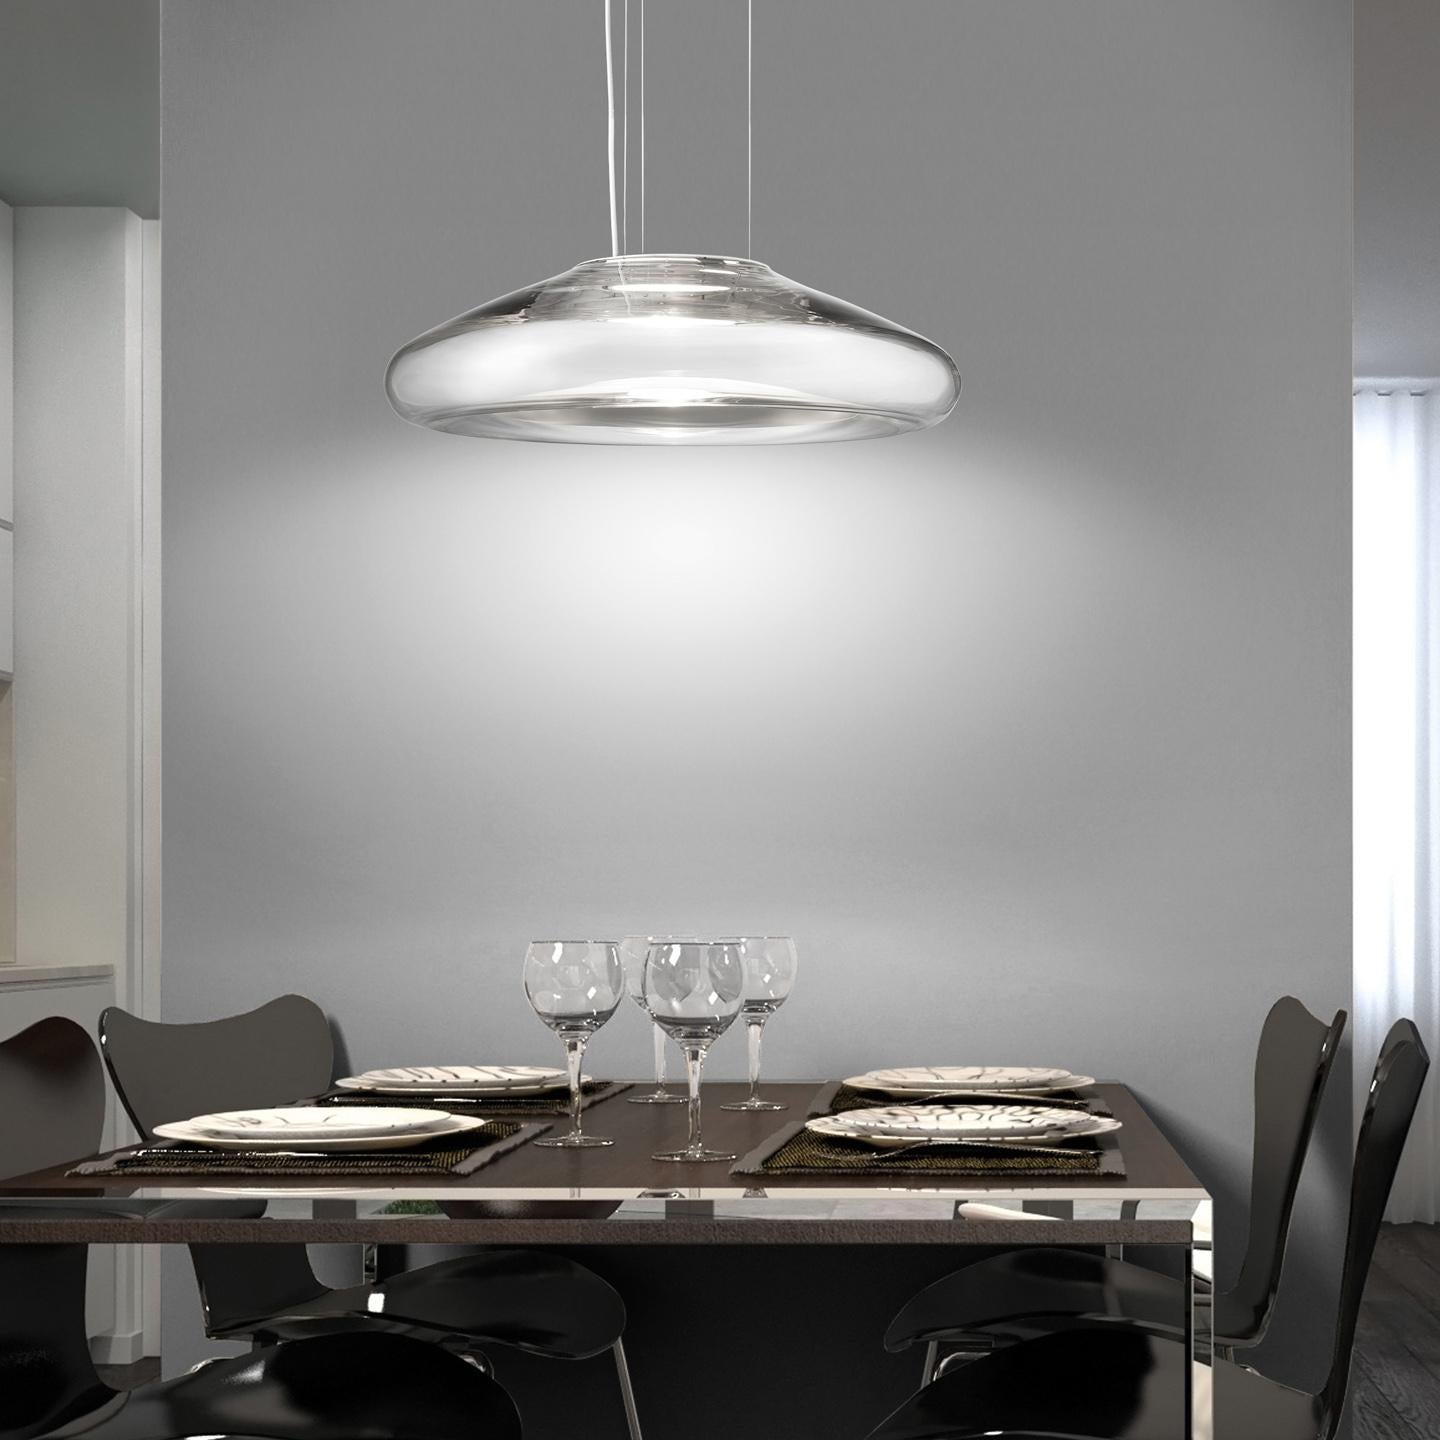 The Keyra creates beautiful light for your home, office or contract space with its beautiful contemporary shape and unique finish. Designed by Roberto Paoli in 2011, the Keyra’s hand-blown shape dimples in the middle and becomes translucent. This